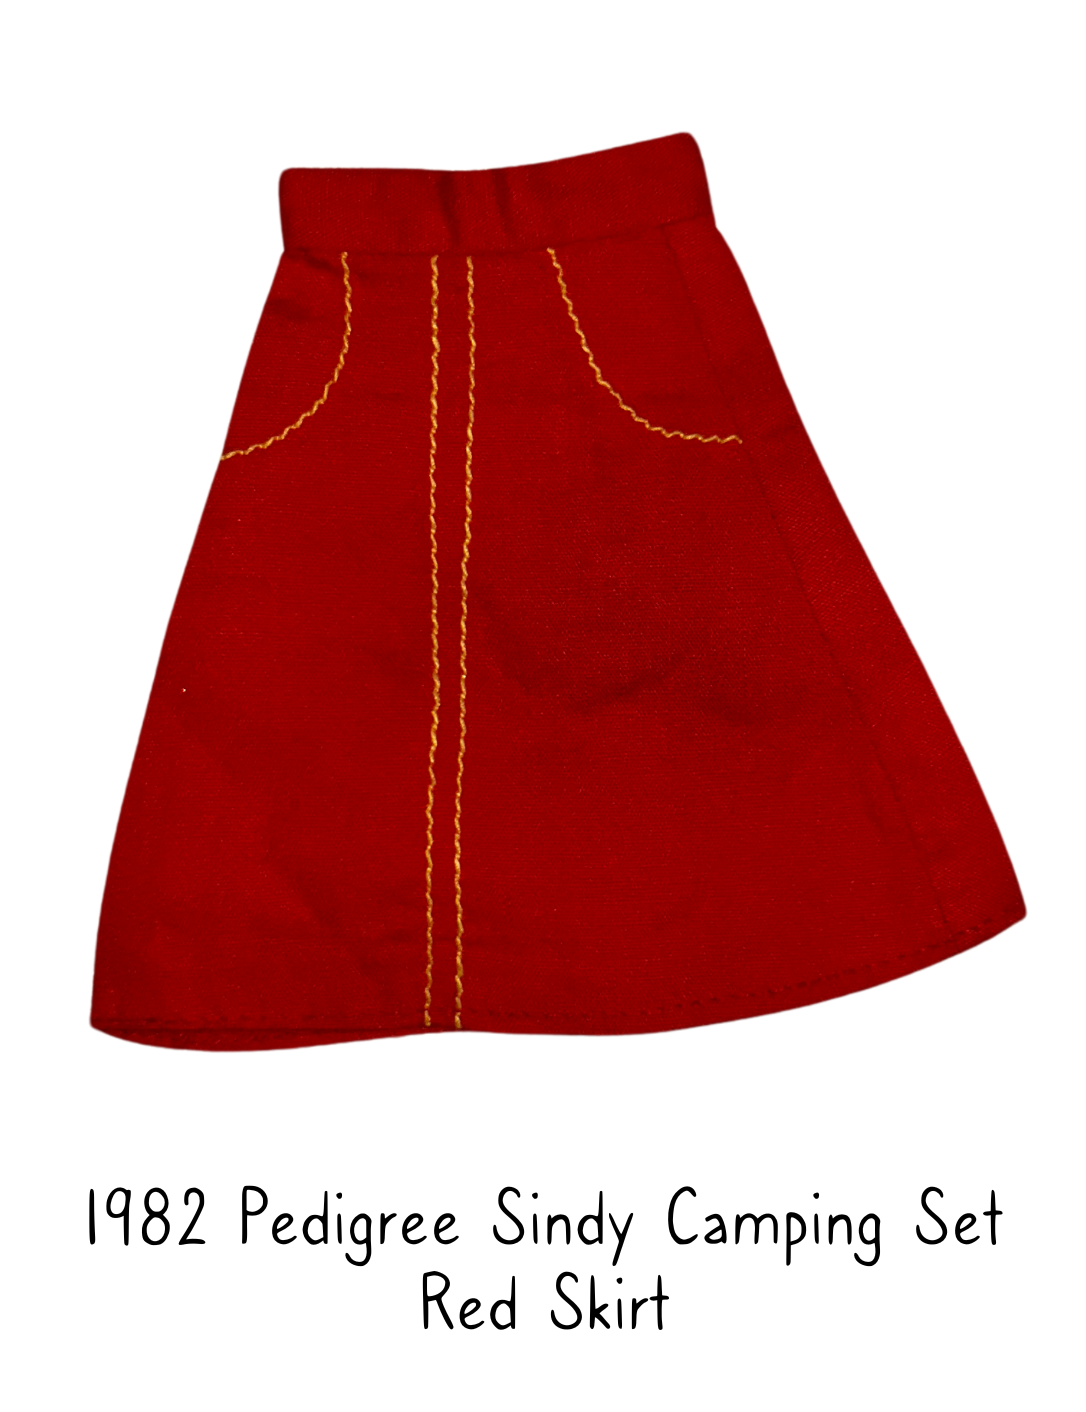 1982 Pedigree Sindy Camping Buggy and Tent Set Red Skirt